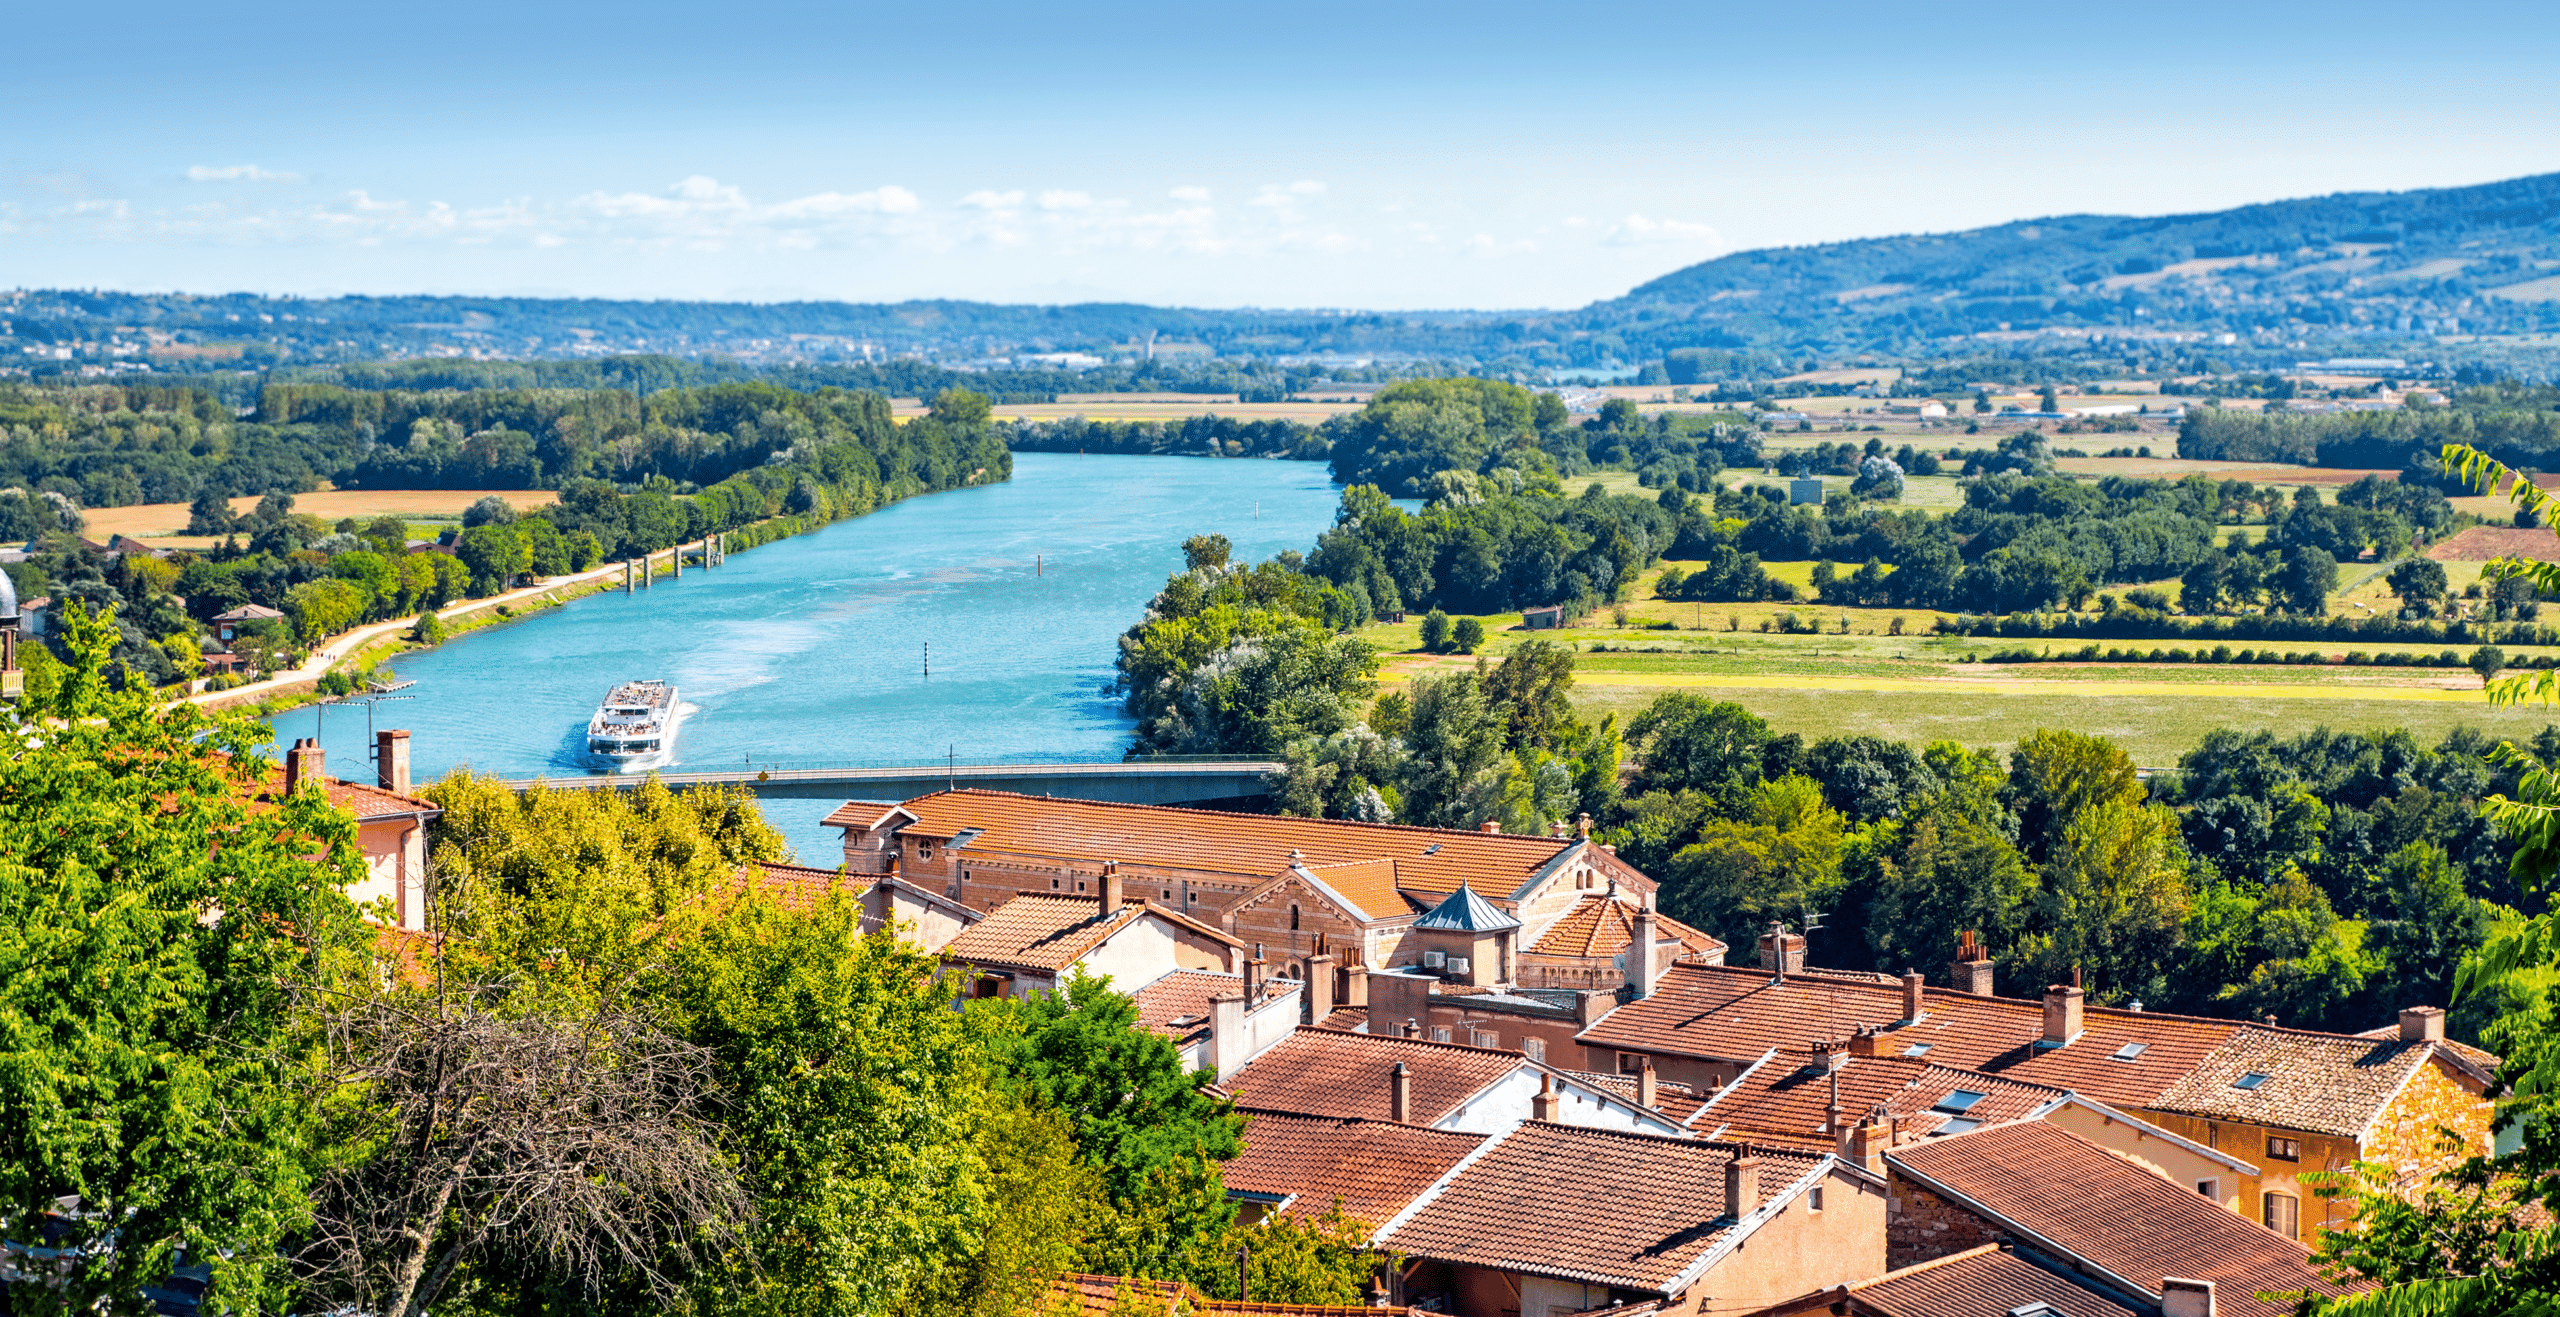 Pretty medieval town is located near Lyon city along Saone River - iStock/Gregory Dubos